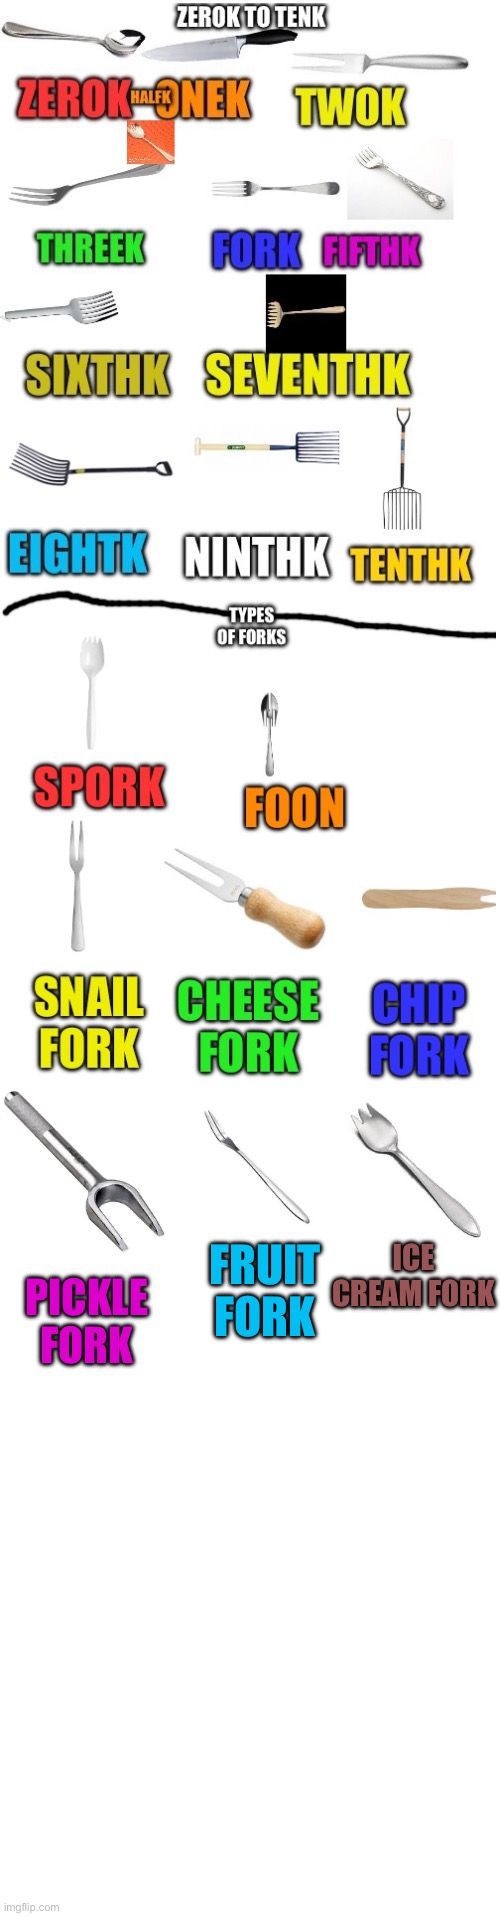 High Quality Zerok + Tenk + Types of Forks Blank Meme Template